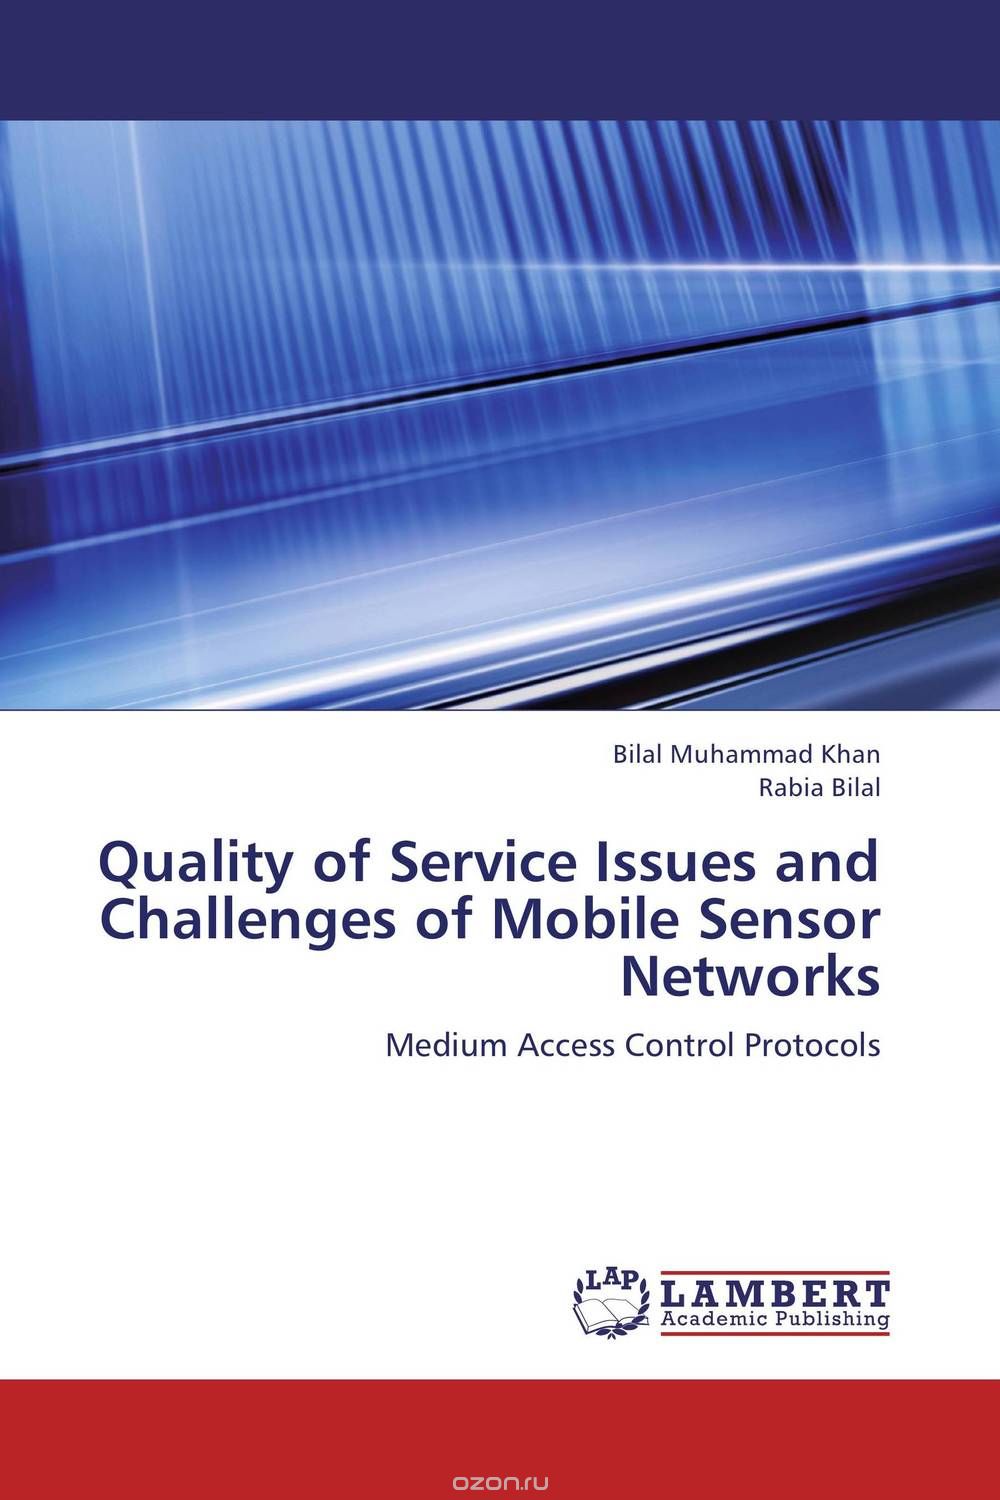 Скачать книгу "Quality of Service Issues and Challenges of Mobile Sensor Networks"